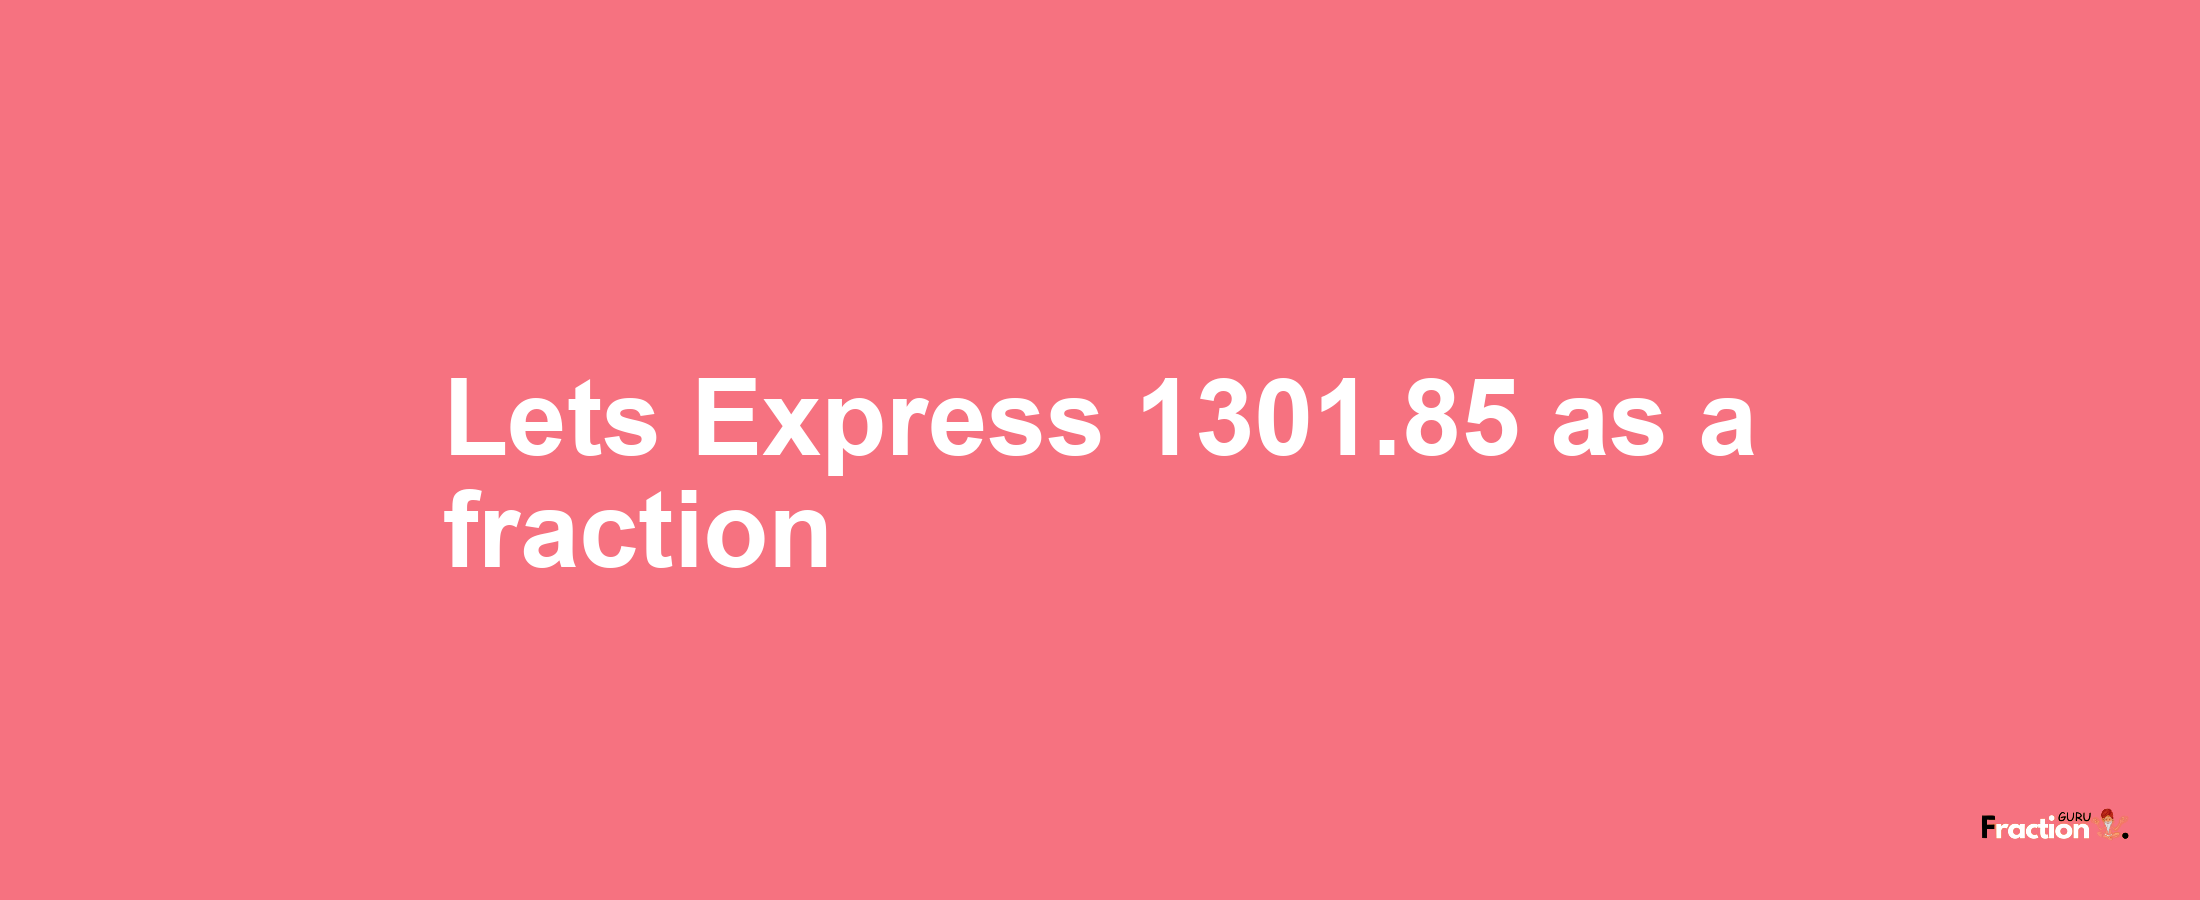 Lets Express 1301.85 as afraction